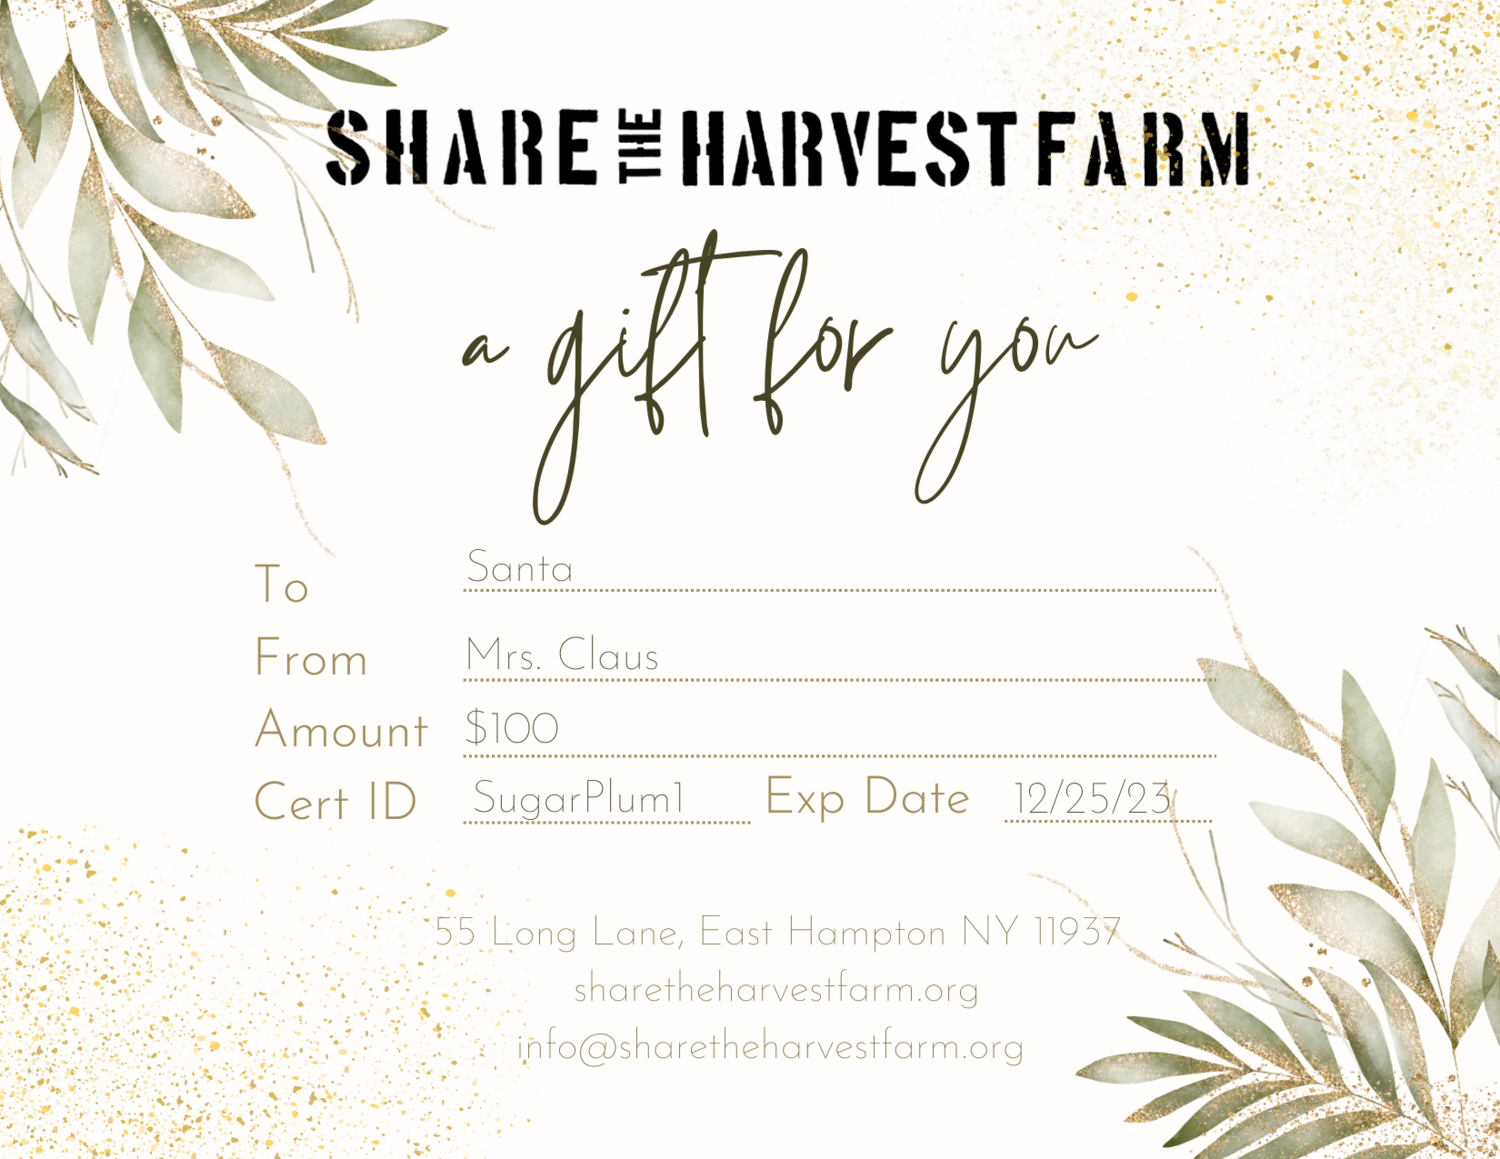 Share the Harvest Gift Certificate $50.00